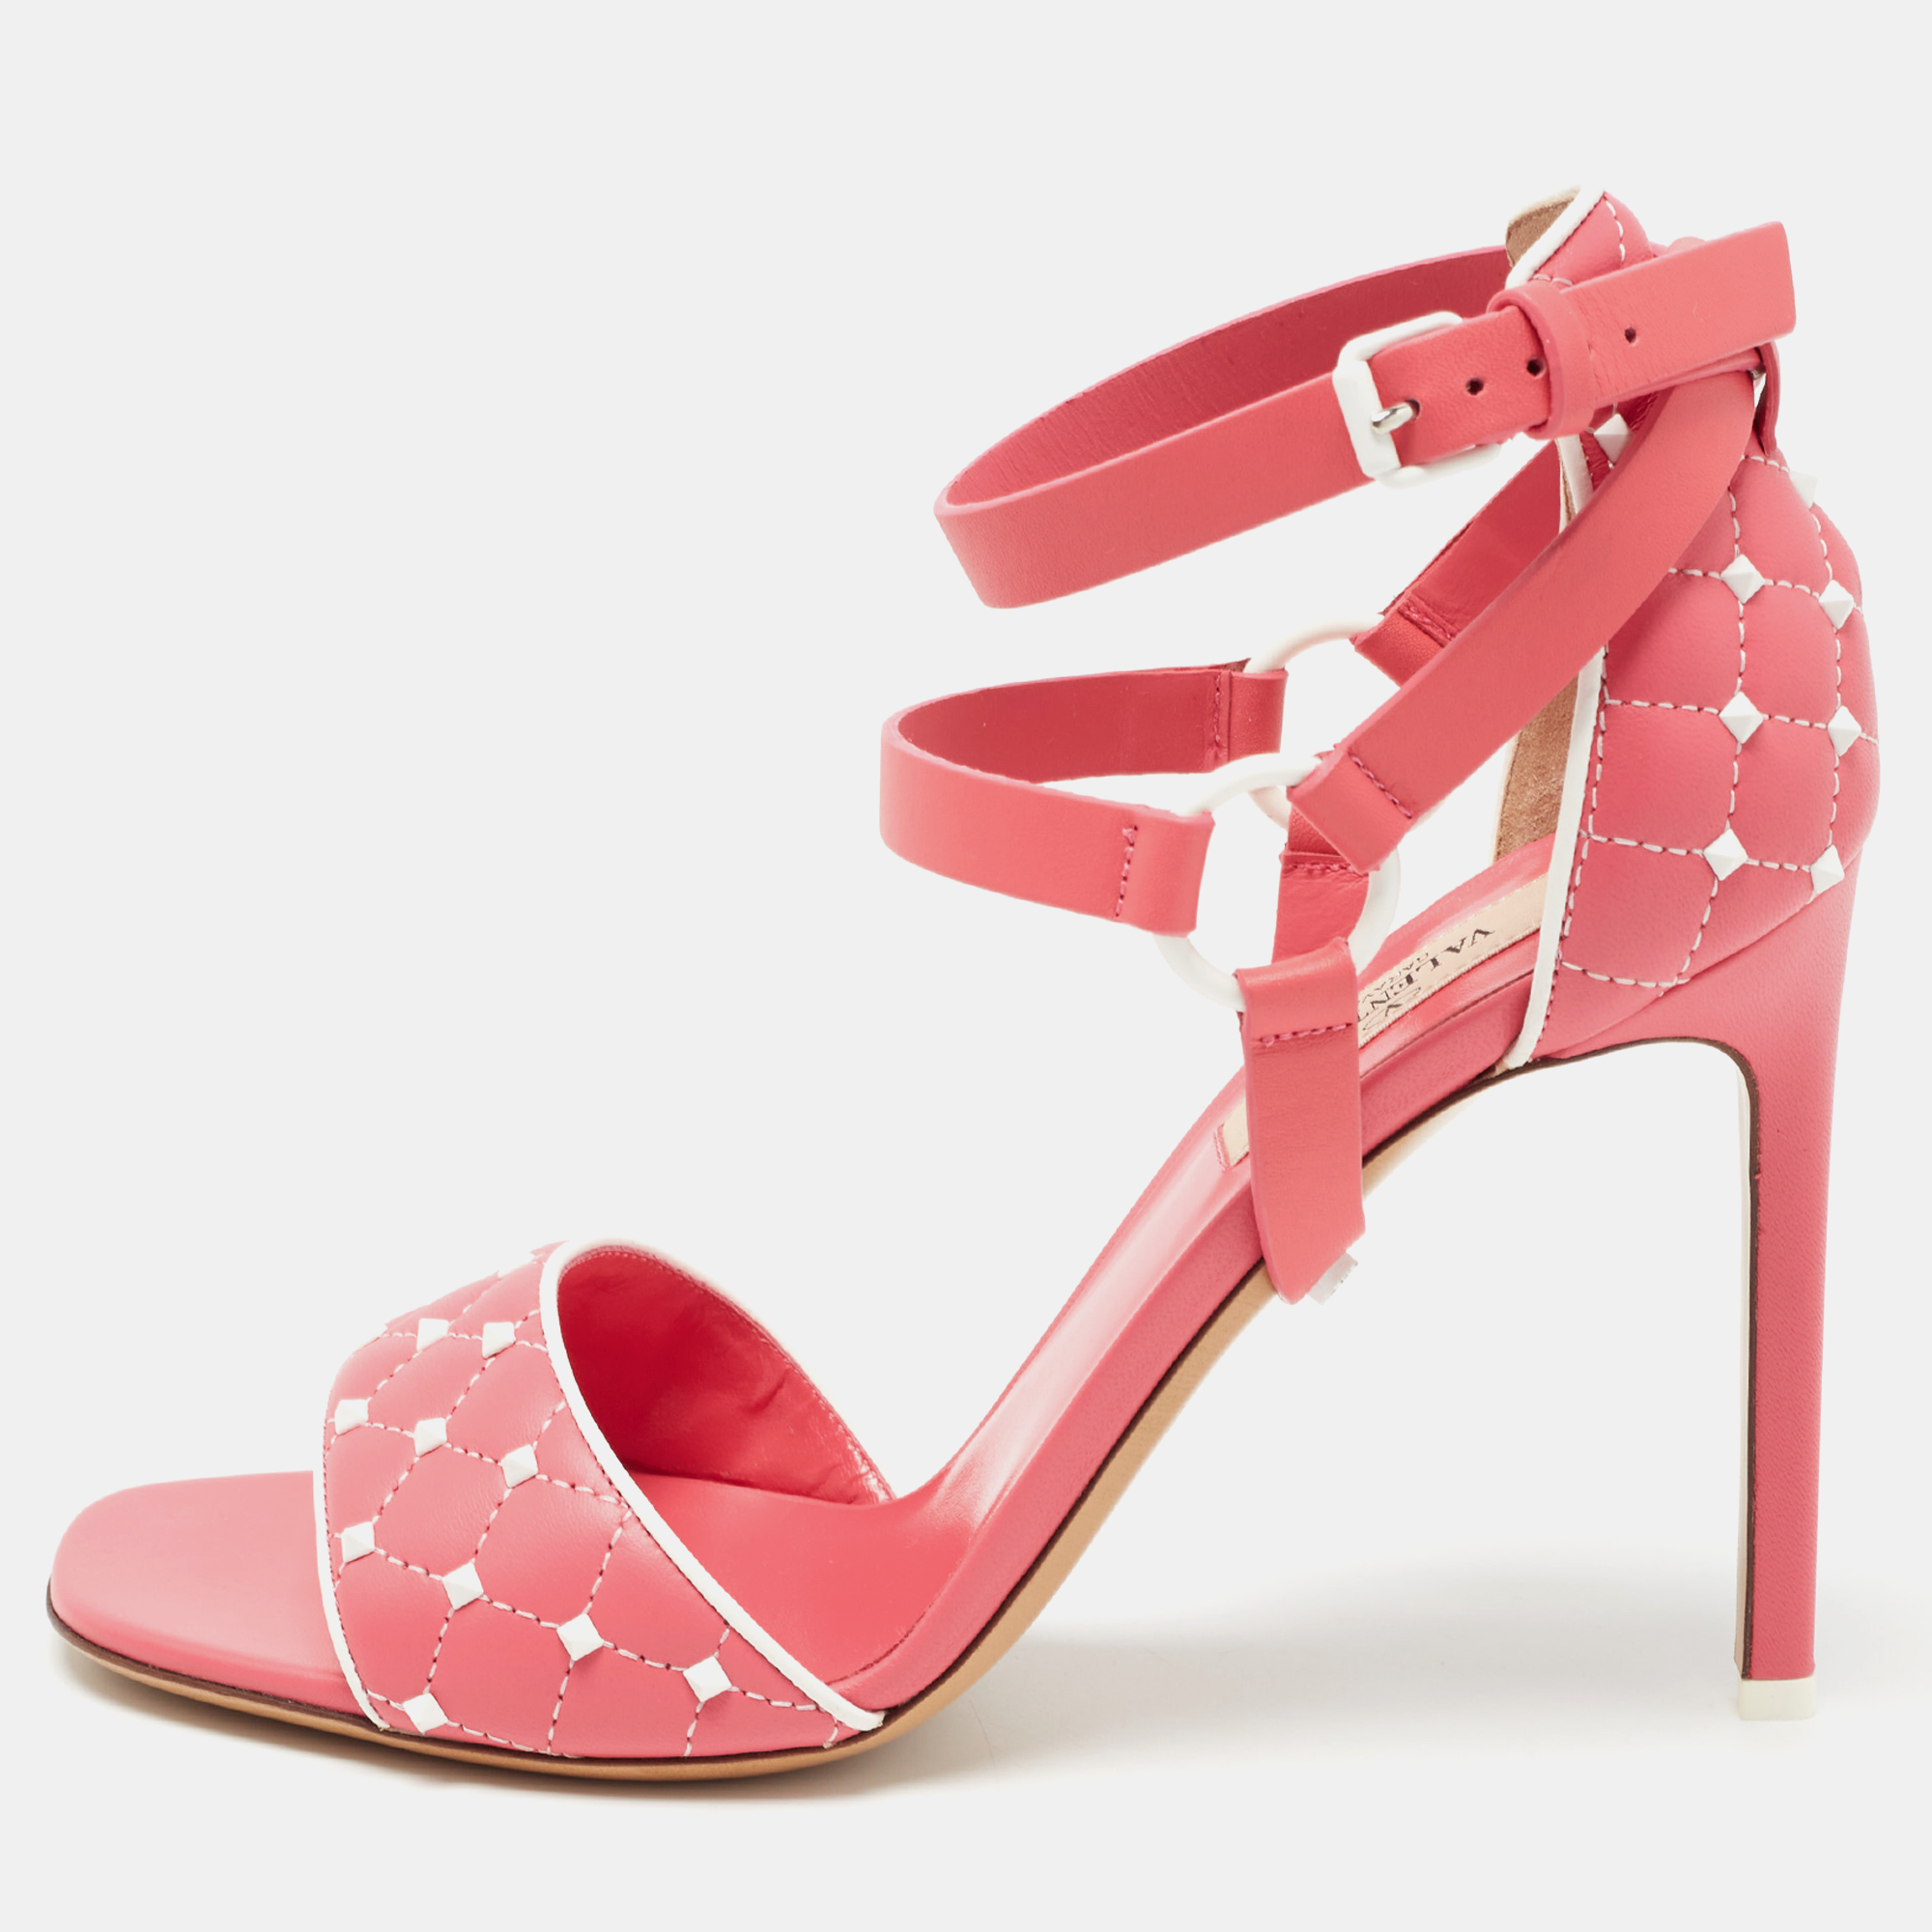 Valentino pink/white leather rockstud ankle strap sandals size 38